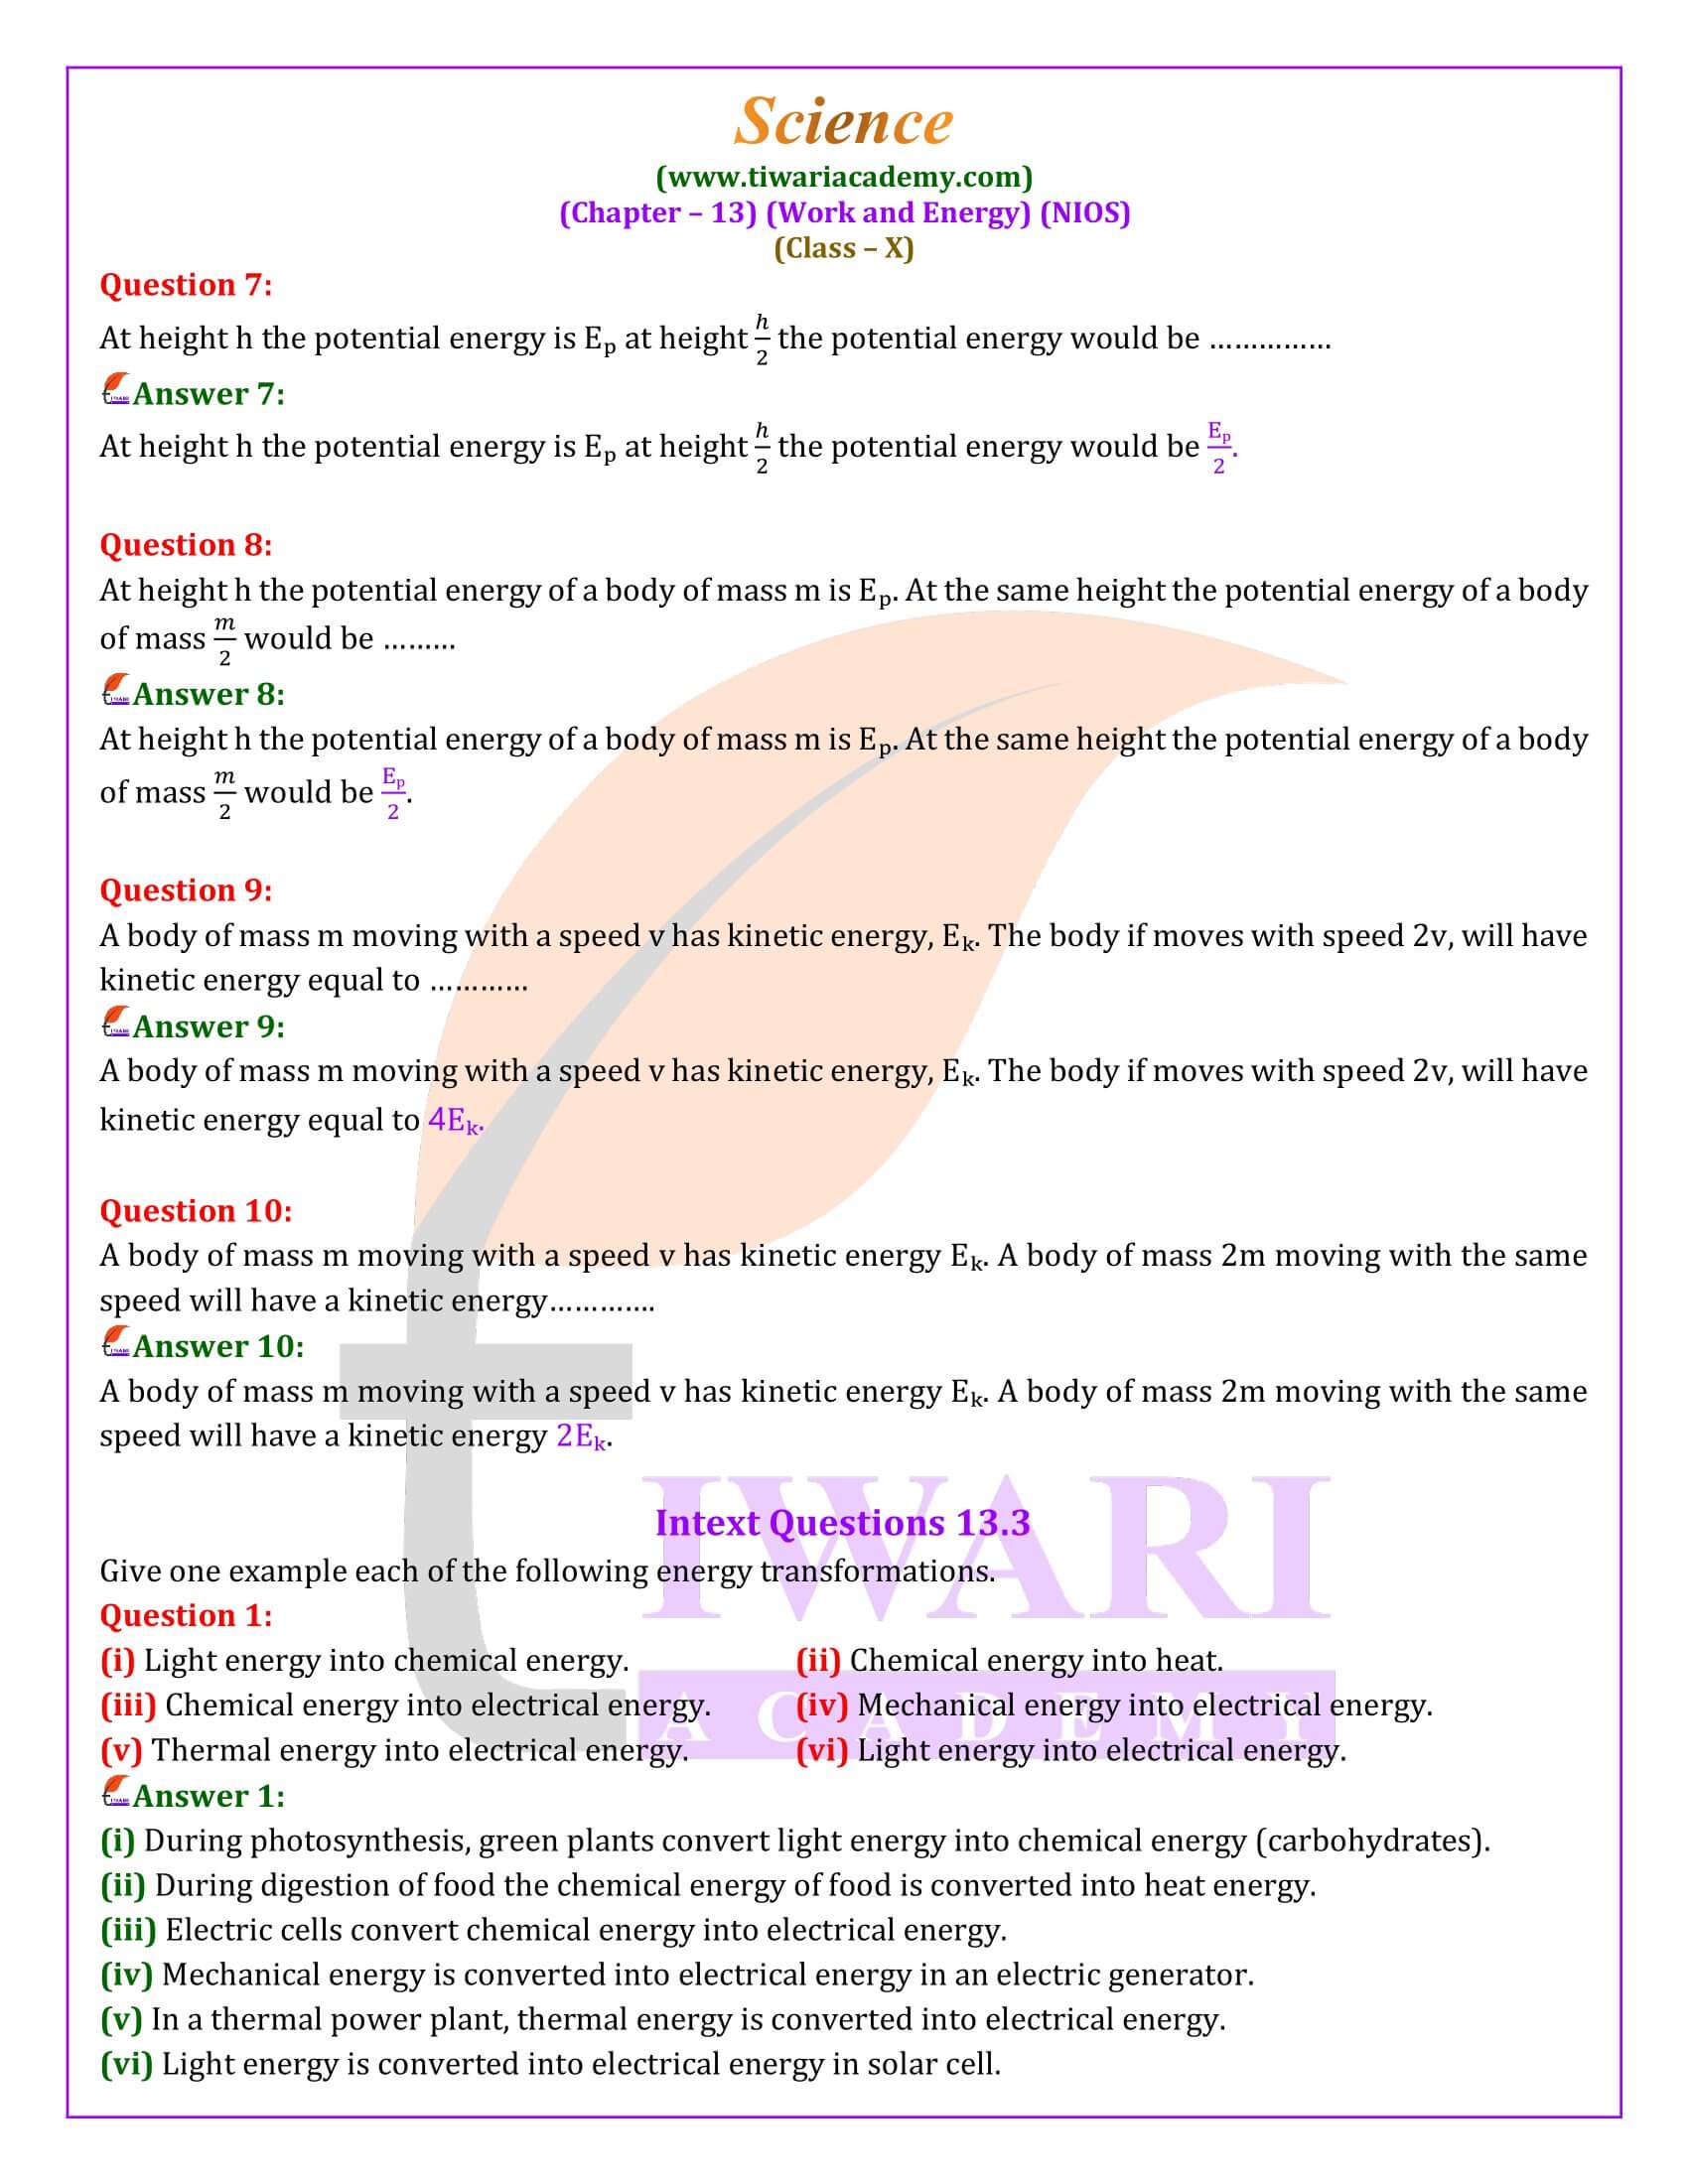 NIOS Class 10 Science Chapter 13 Work and Energy in Hindi and English Medium